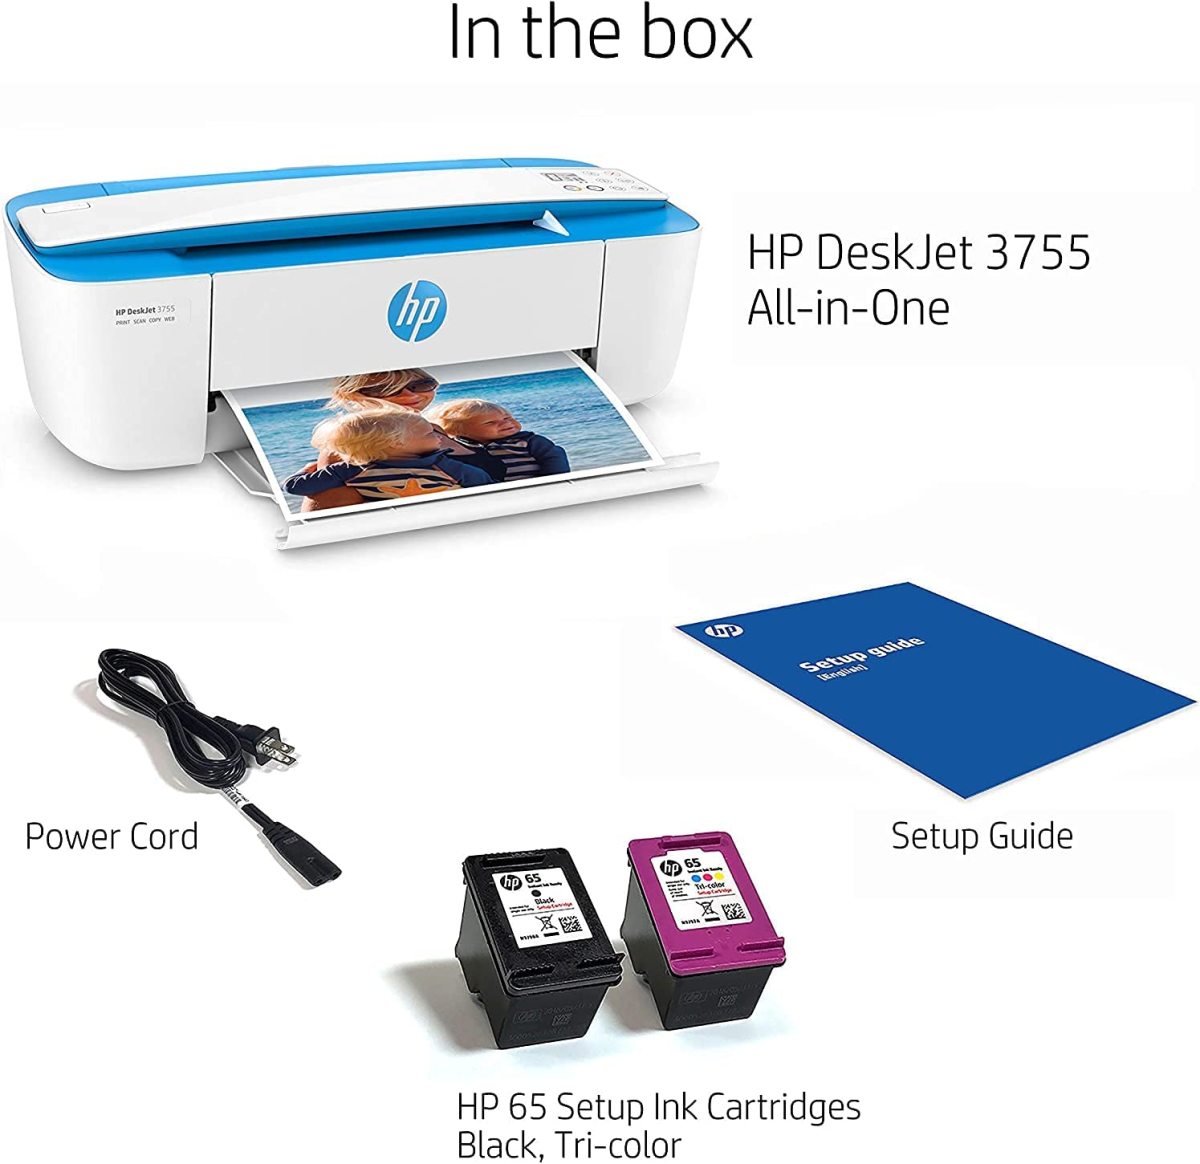 review-hp-deskjet-3755-compact-all-in-one-wireless-printer-3-year-review